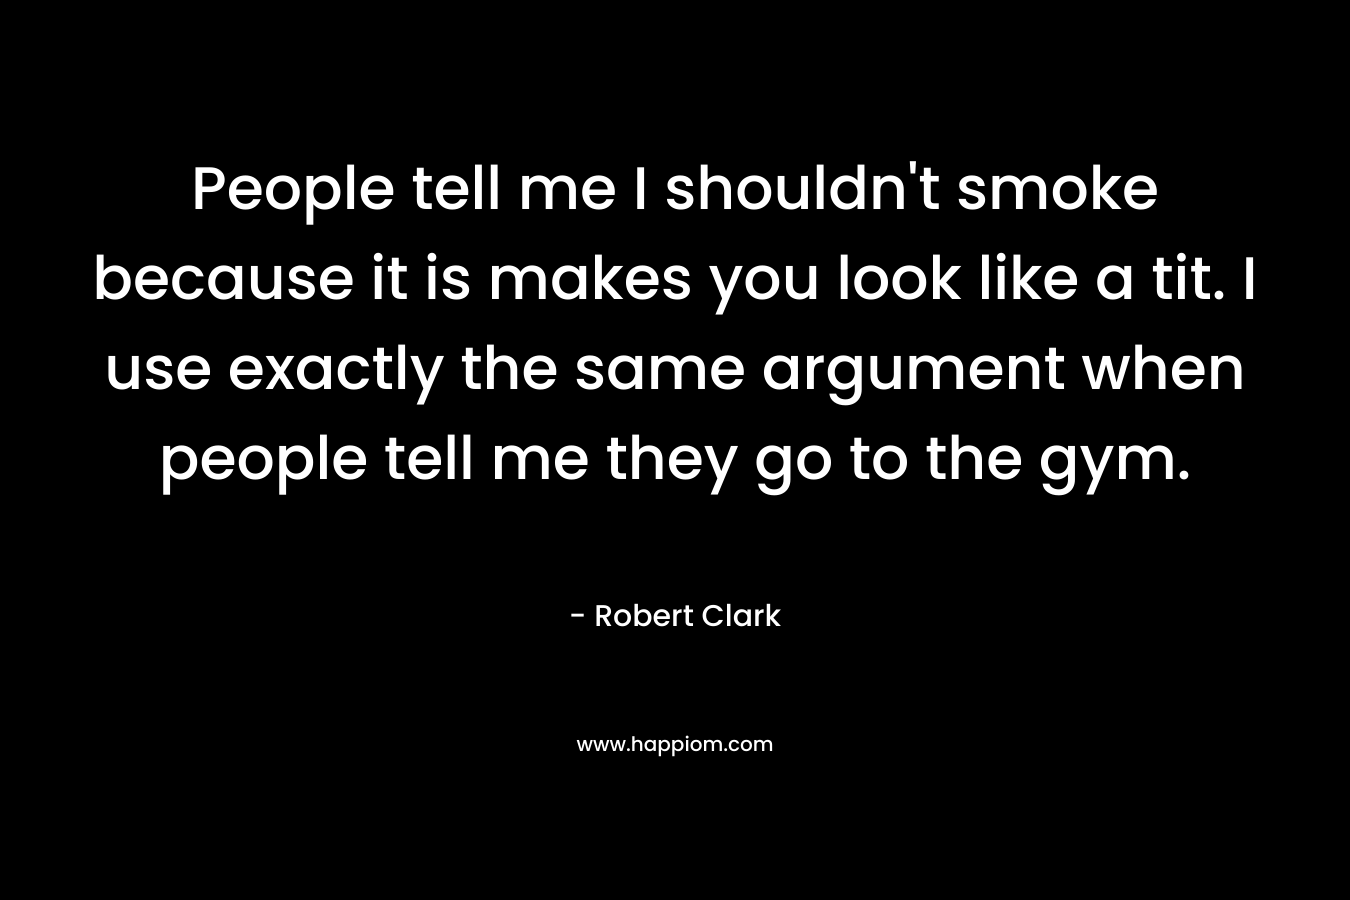 People tell me I shouldn’t smoke because it is makes you look like a tit. I use exactly the same argument when people tell me they go to the gym. – Robert Clark